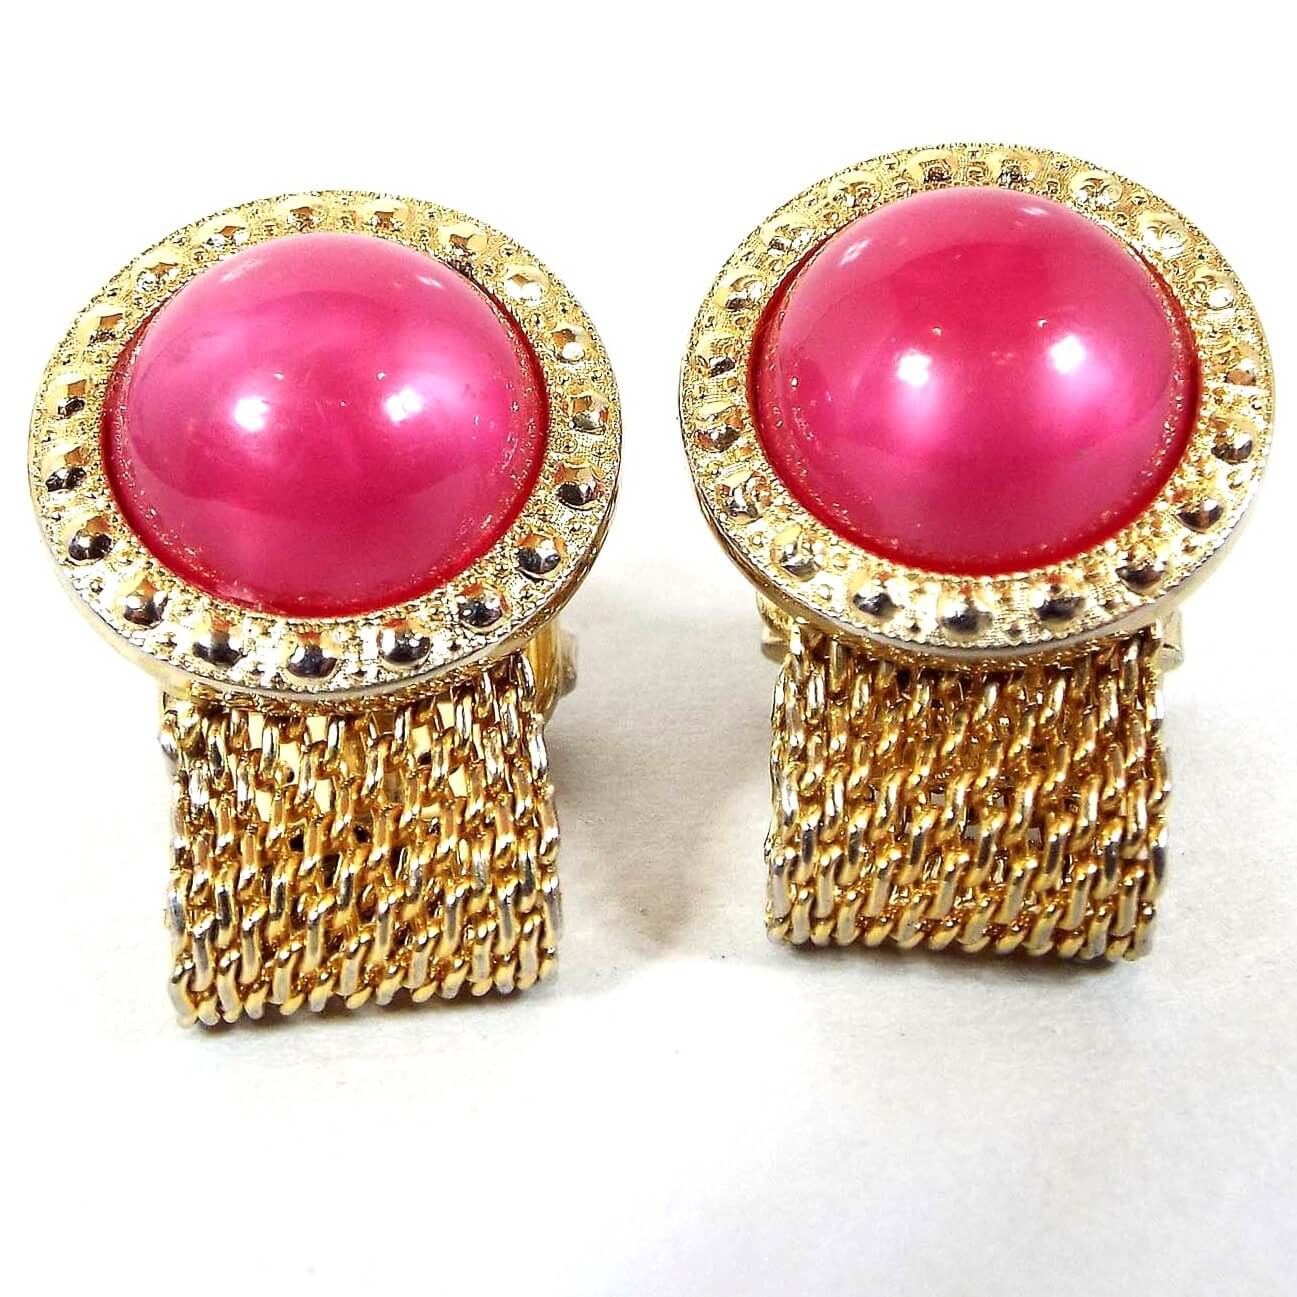 Front view of the Mid Century vintage Foster mesh wrap around cufflinks. They are gold tone in color and have round tops with bright pink moonglow lucite cabs. The cabs are pearly pink and have a glowy effect as you move around.